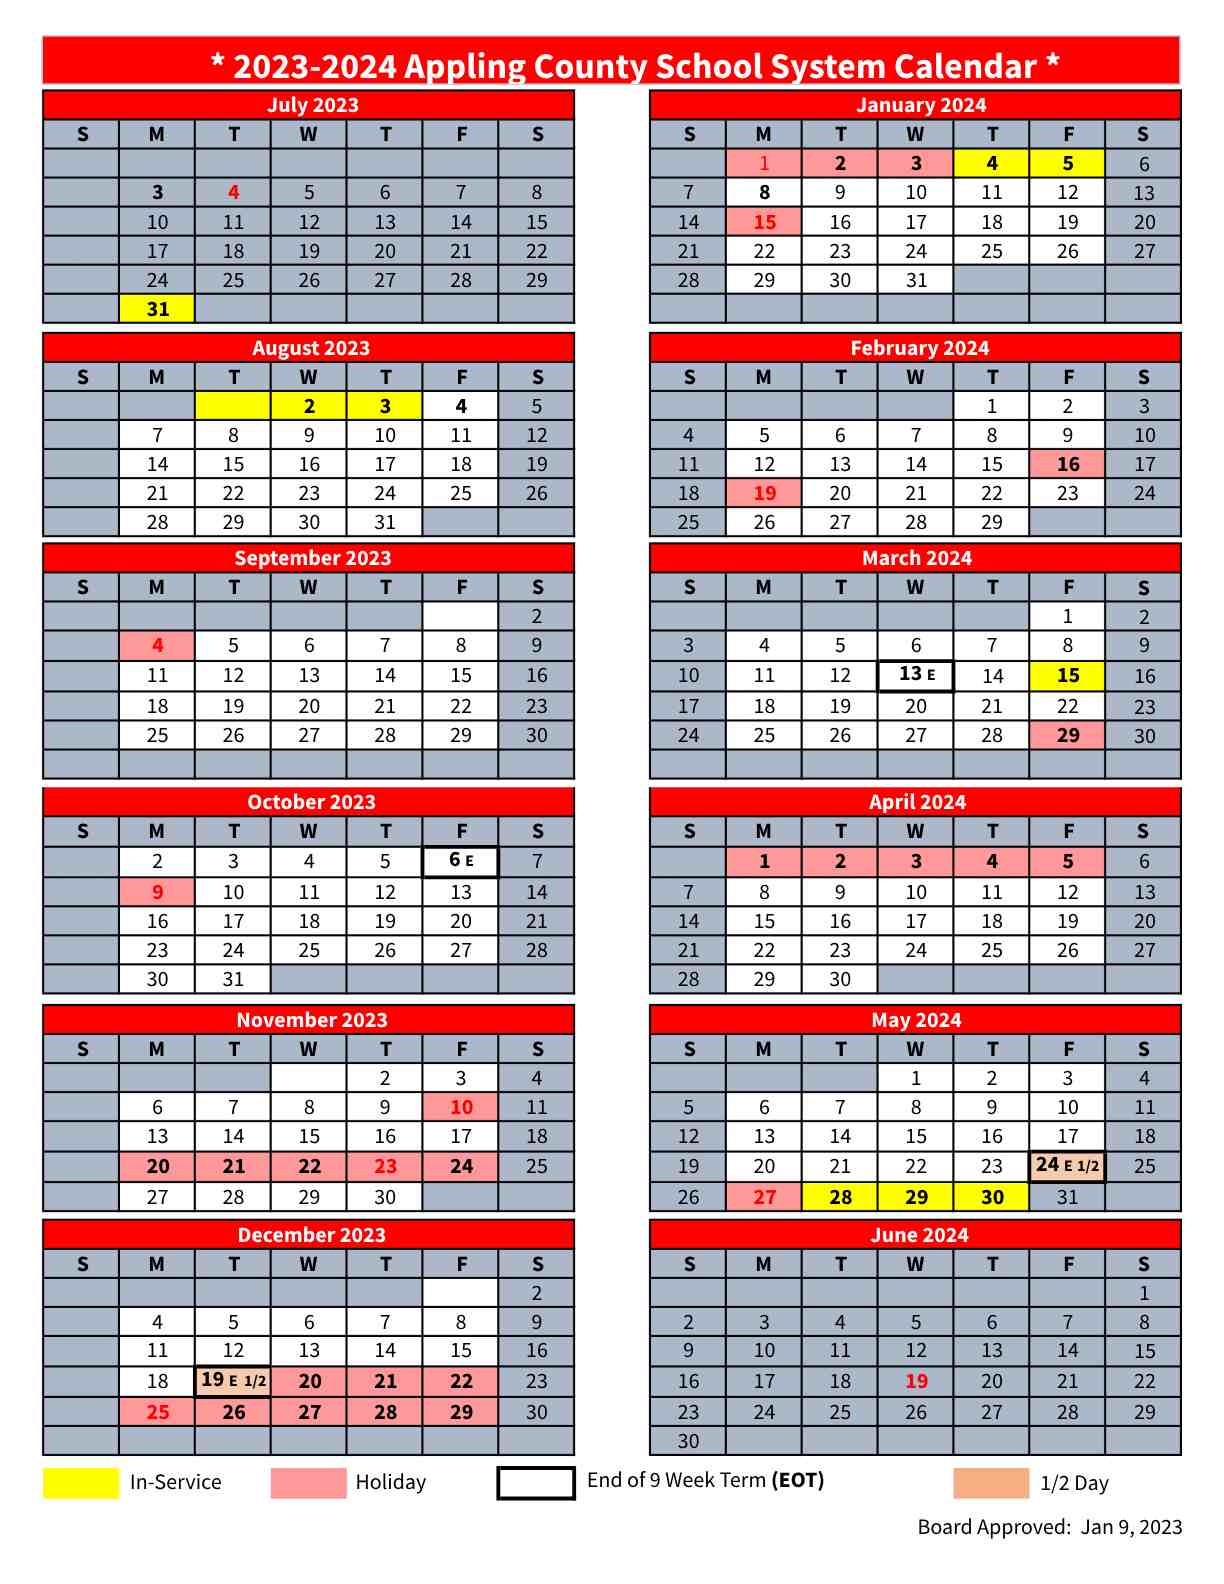 Appling County School District Calendar 2023 and 2024